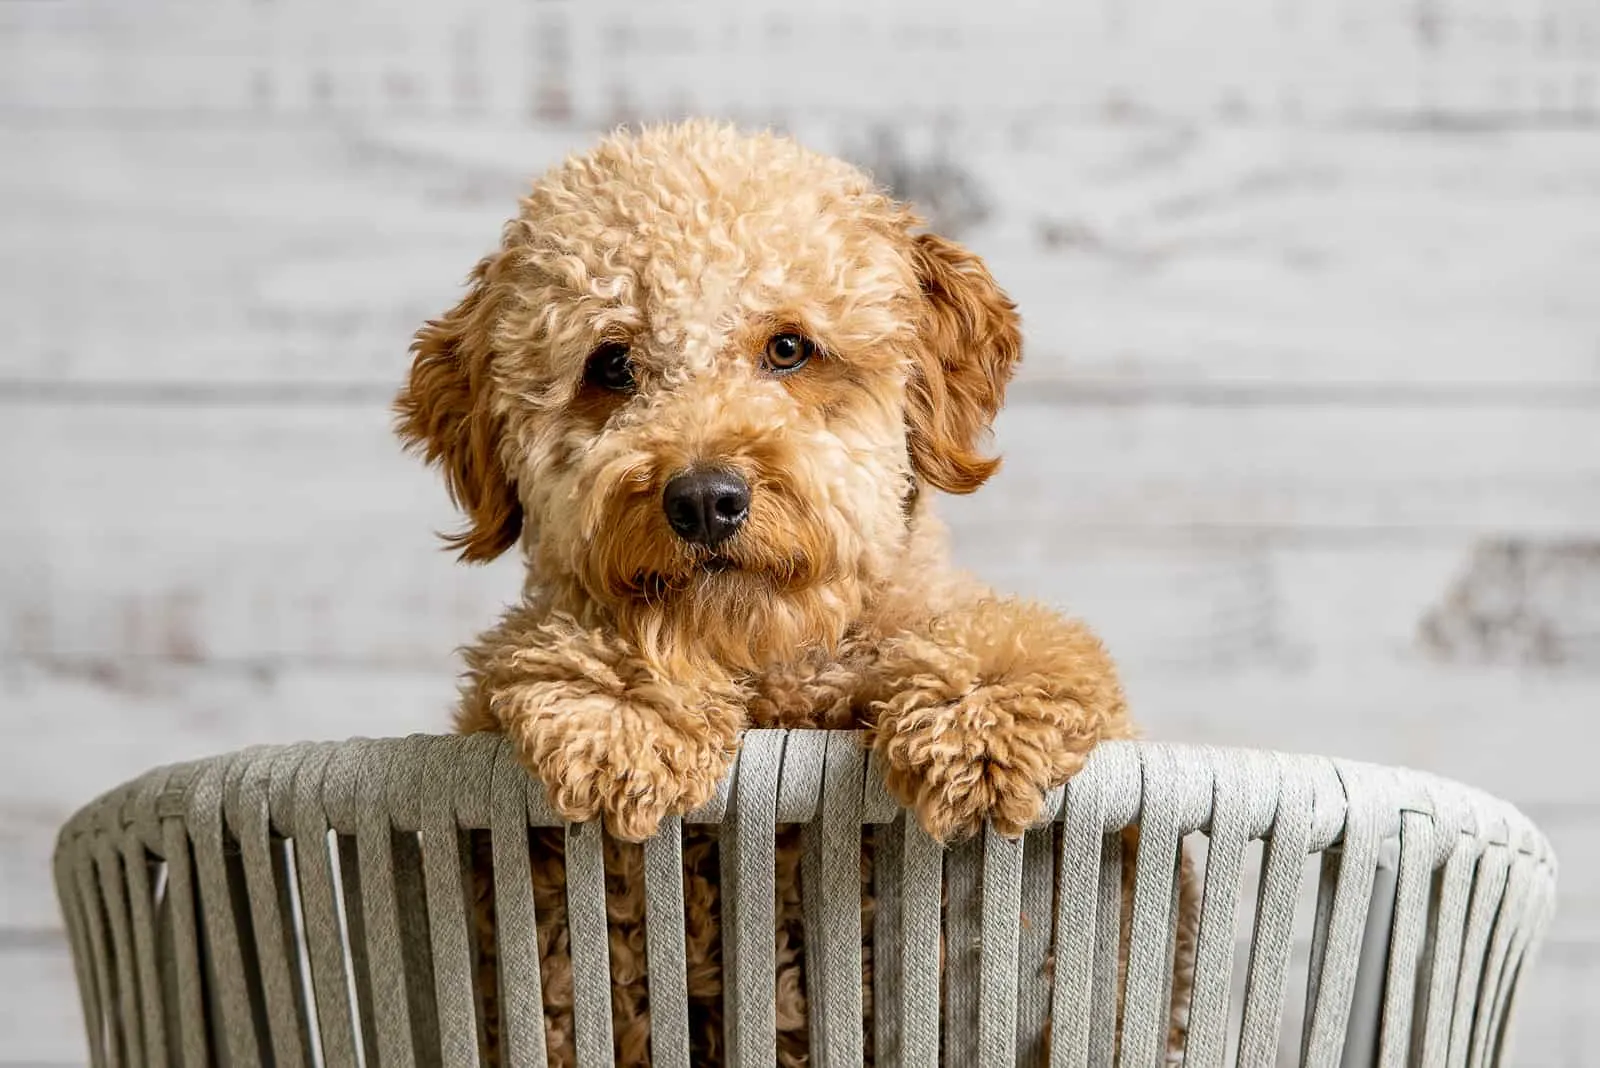 A mini golden doodle puppy looking to the camera